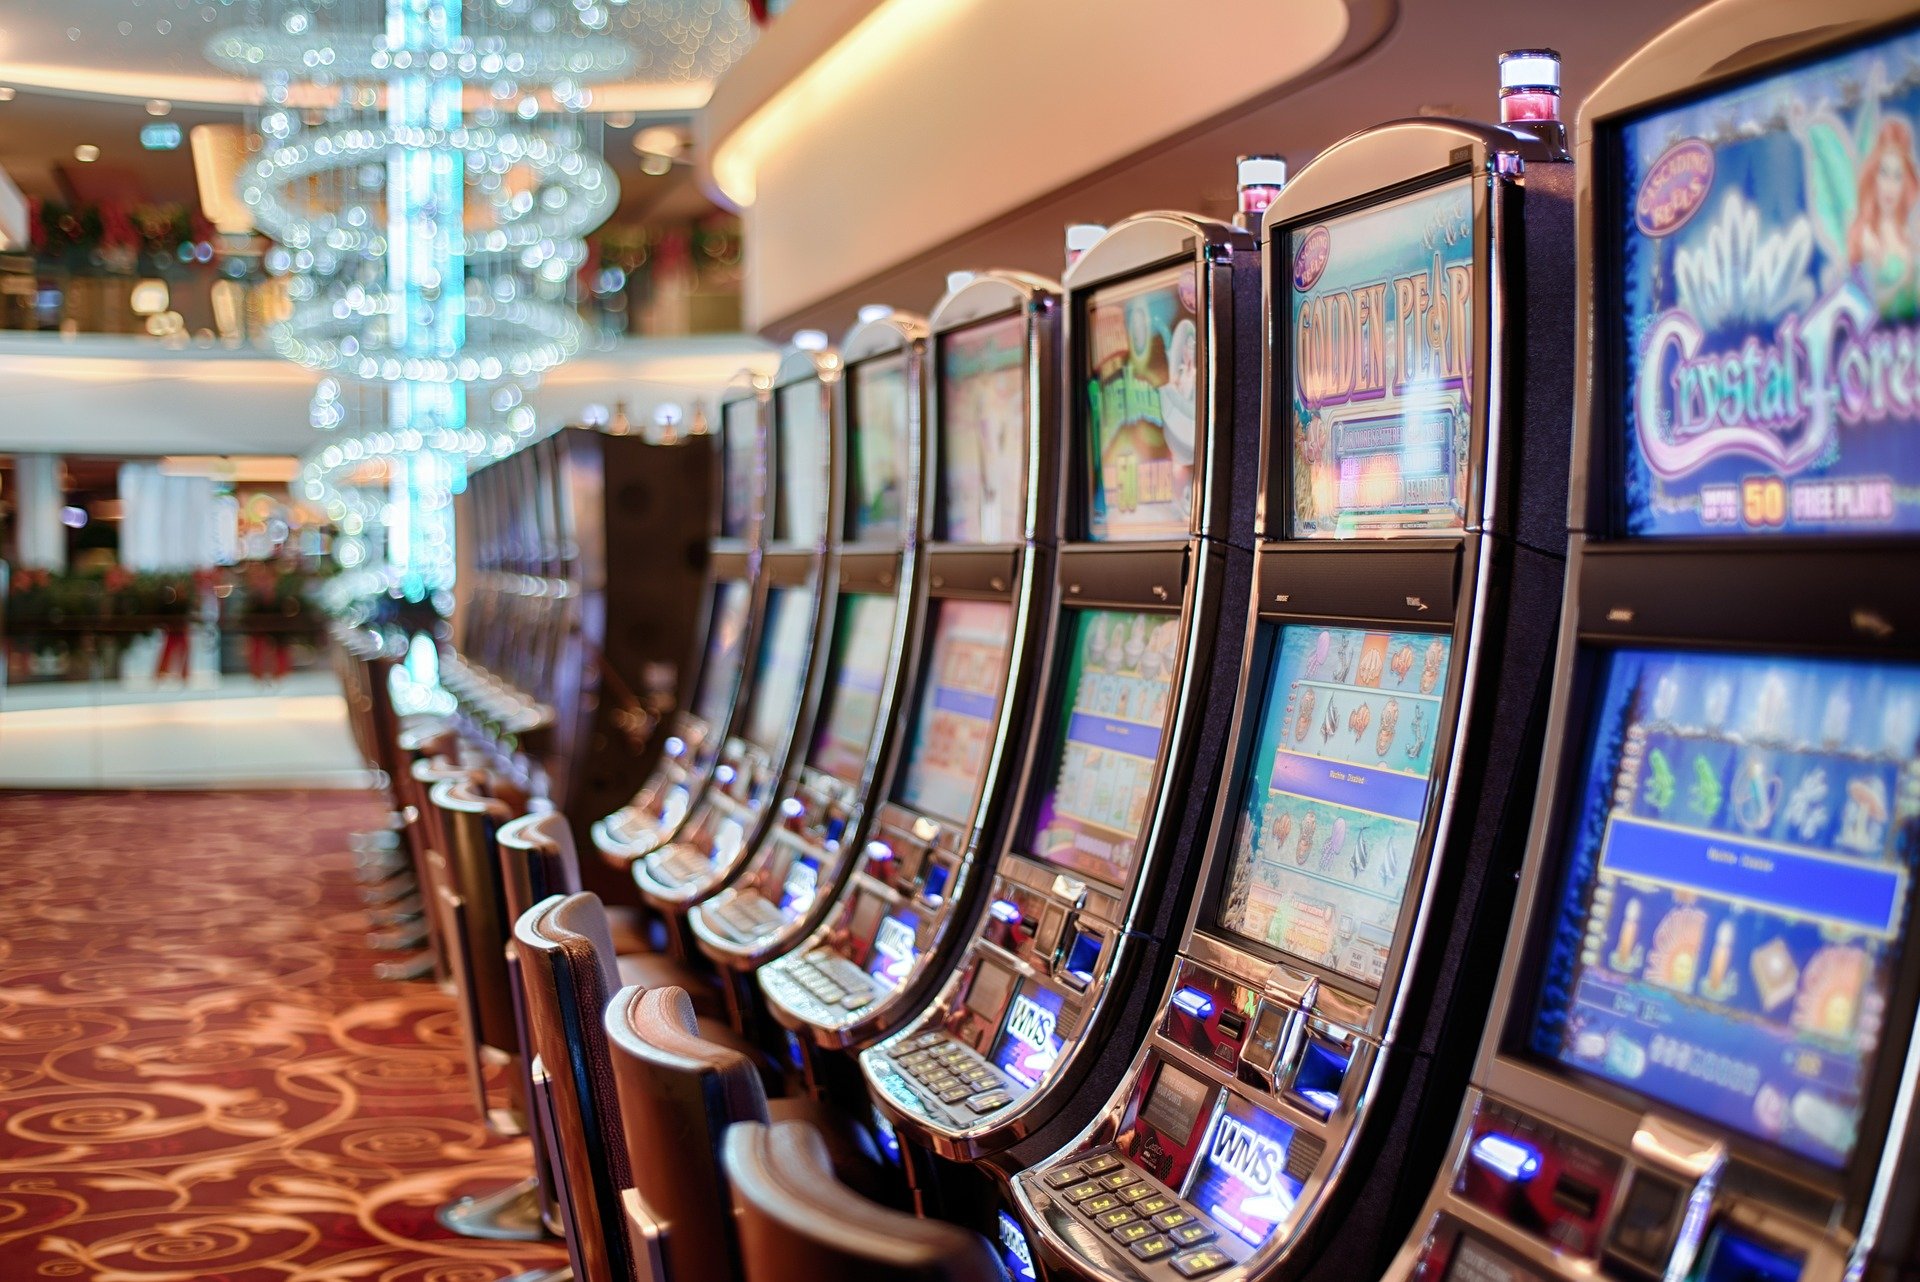 When new players learn slot-machine tricks, they avoid gambling addiction